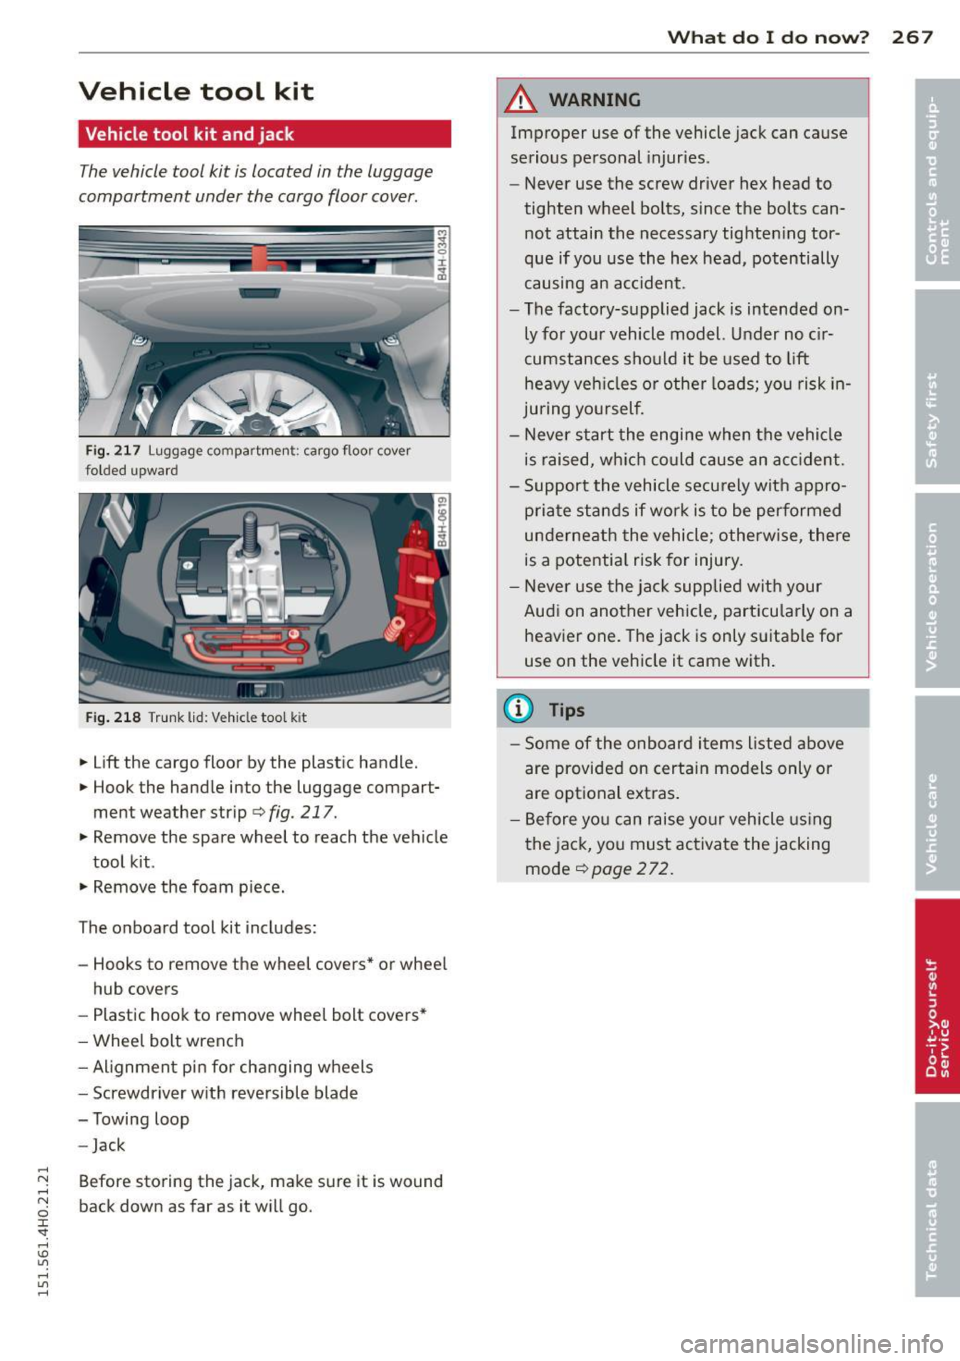 AUDI A8 2015  Owners Manual .... N .... N 
0 J: 
<I. .... I.O 
" .... 
" .... 
Vehicle  tool  kit 
Vehicle tool  kit  and jack 
The vehicle tool  kit is located  in the  luggage 
compartment  under  the  cargo floor cover. 
